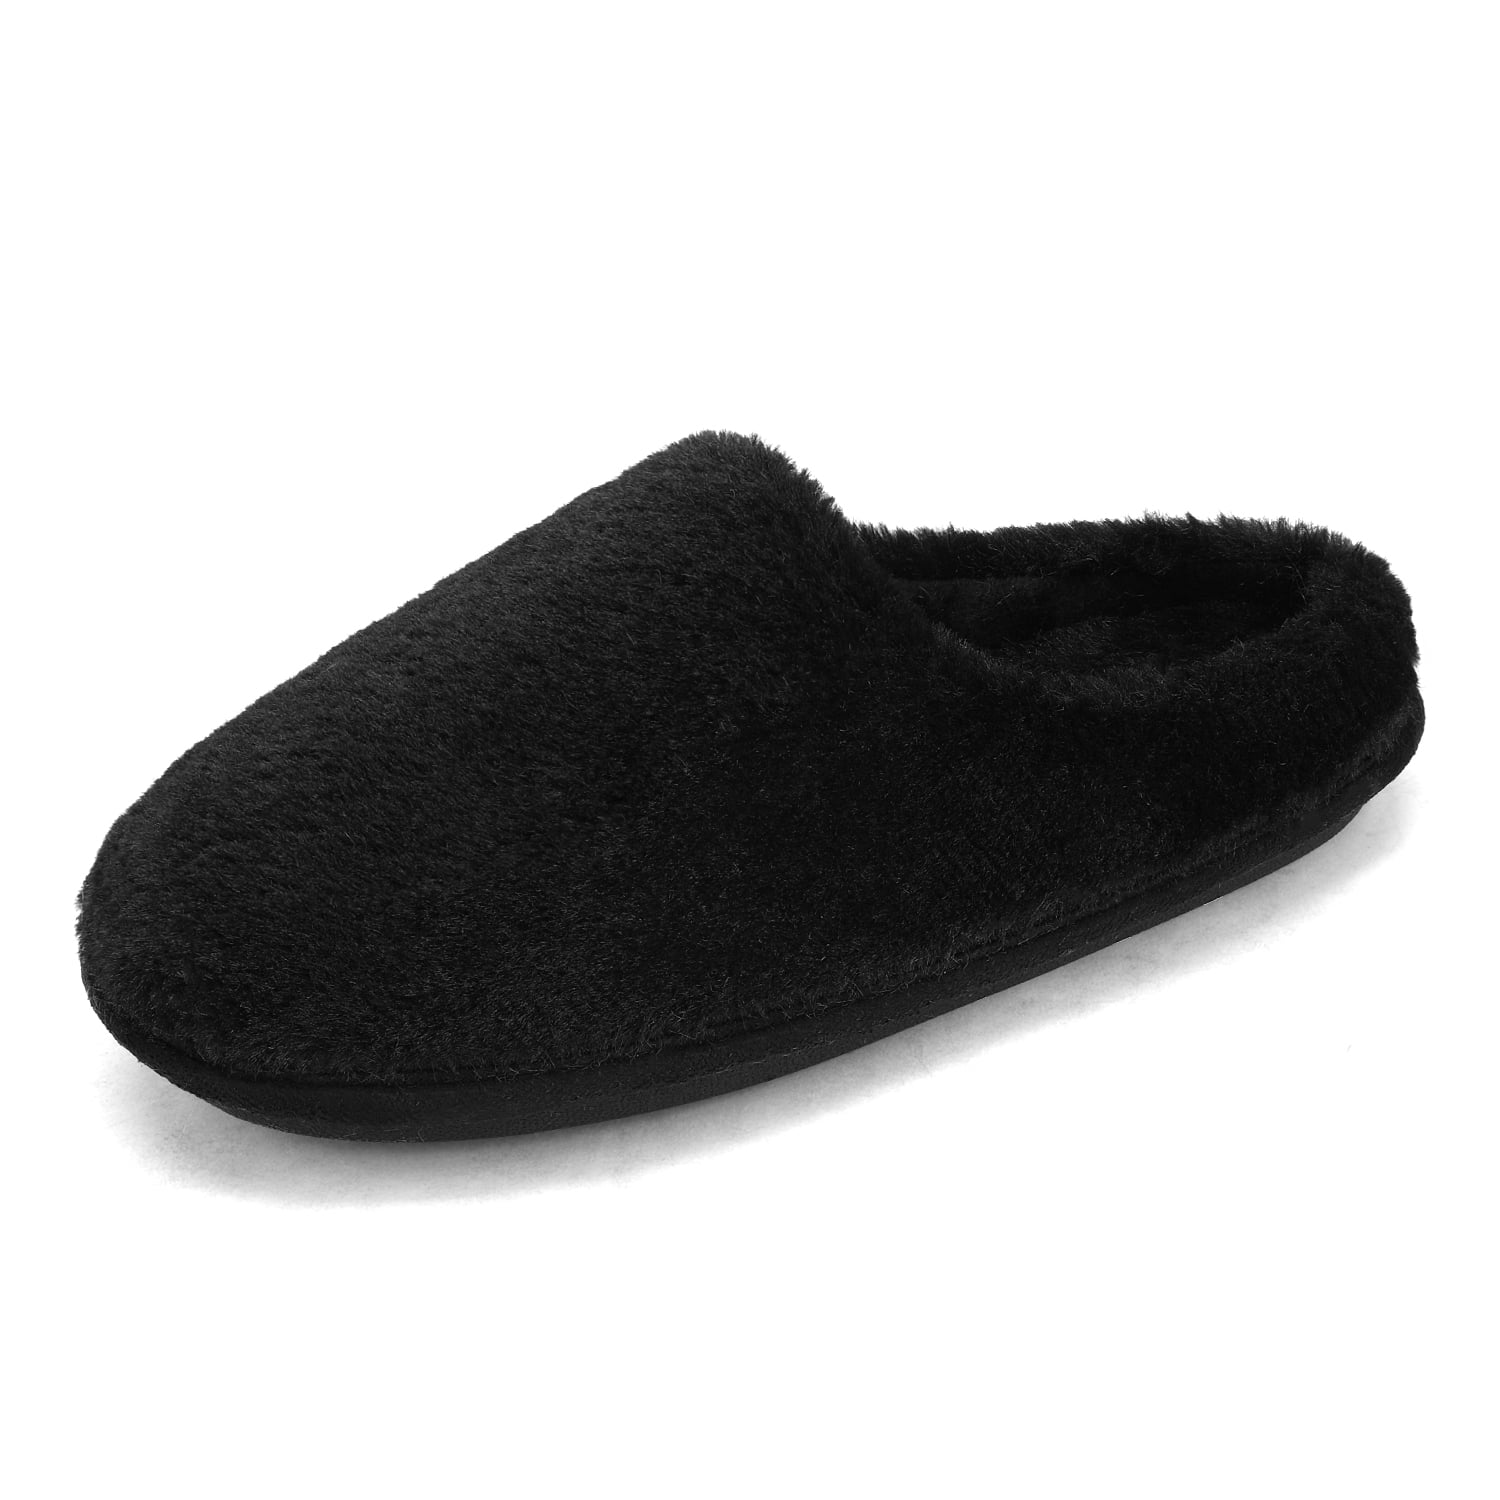 DREAM PAIRS Plush Fuzzy Slippers For Women Slip on Indoor Winter House ...